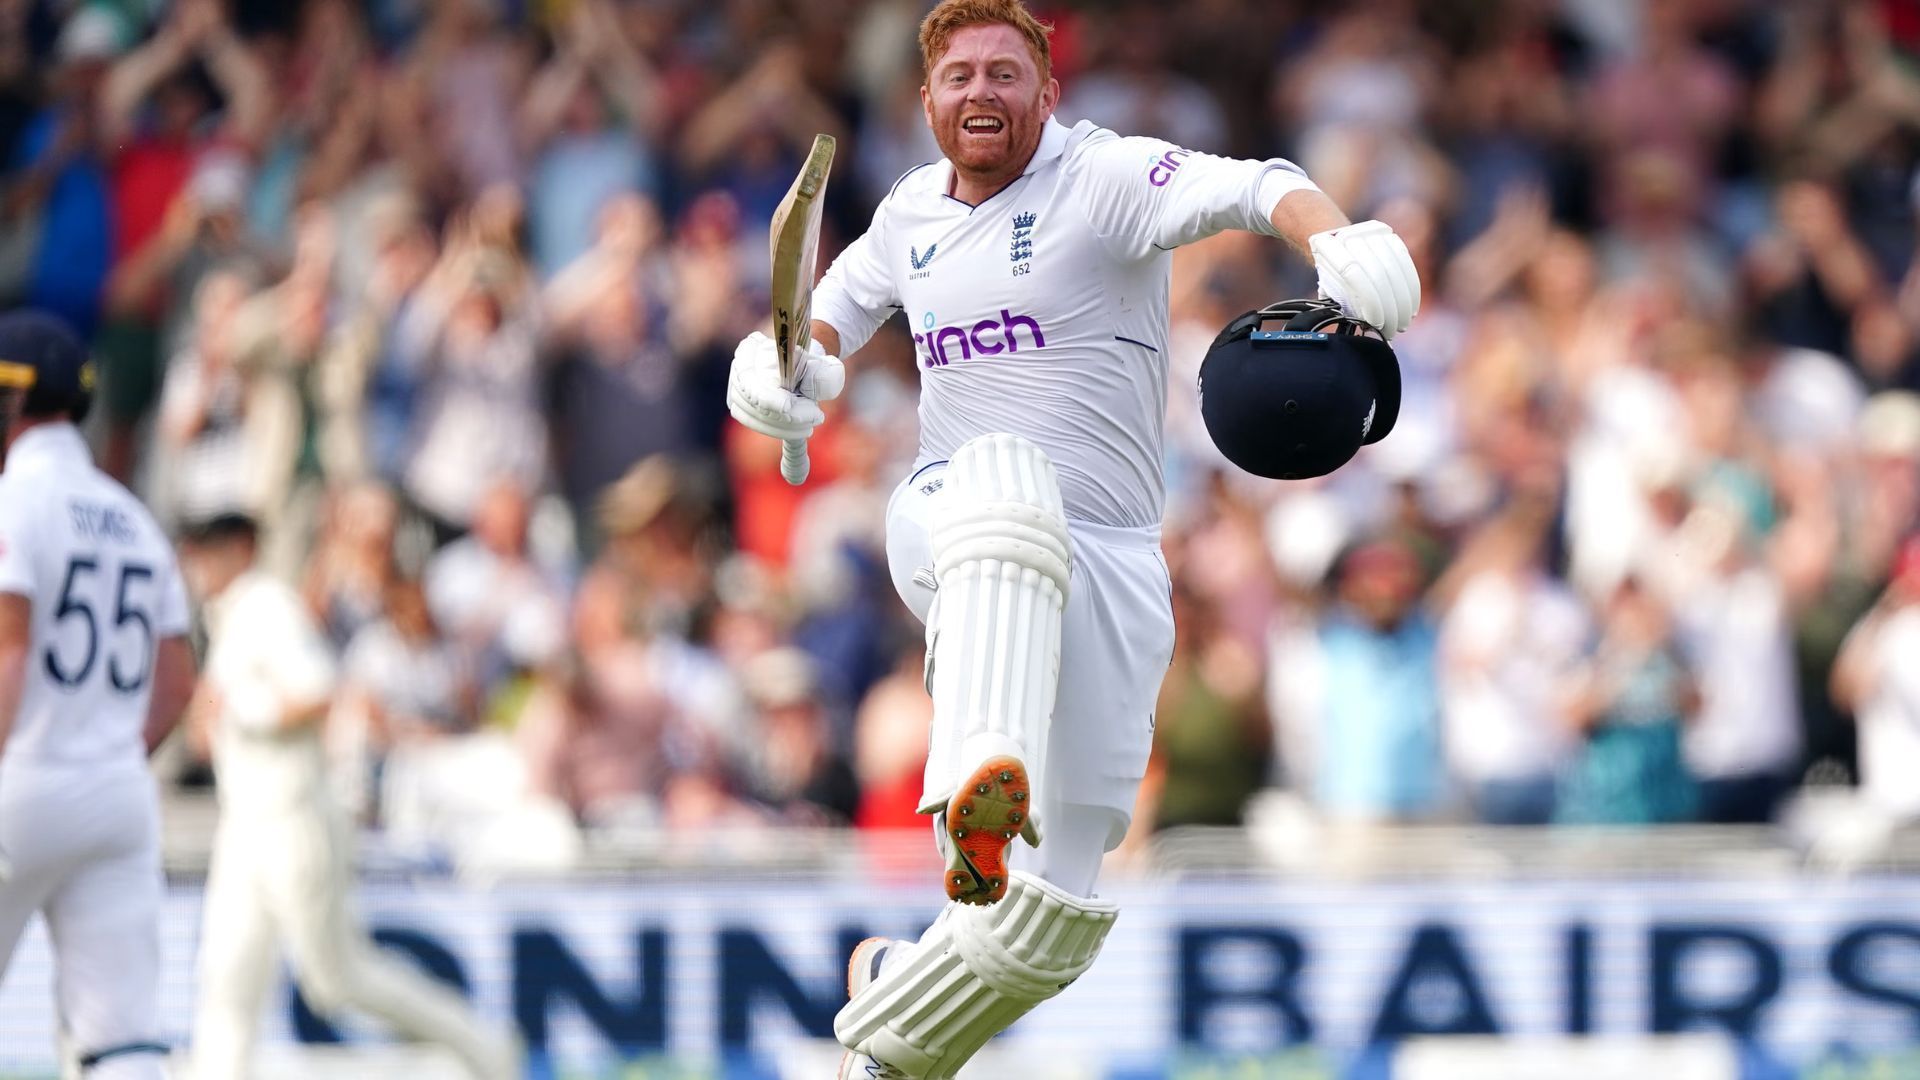 Jonny Bairstow has played some of the best knocks of his career in the 